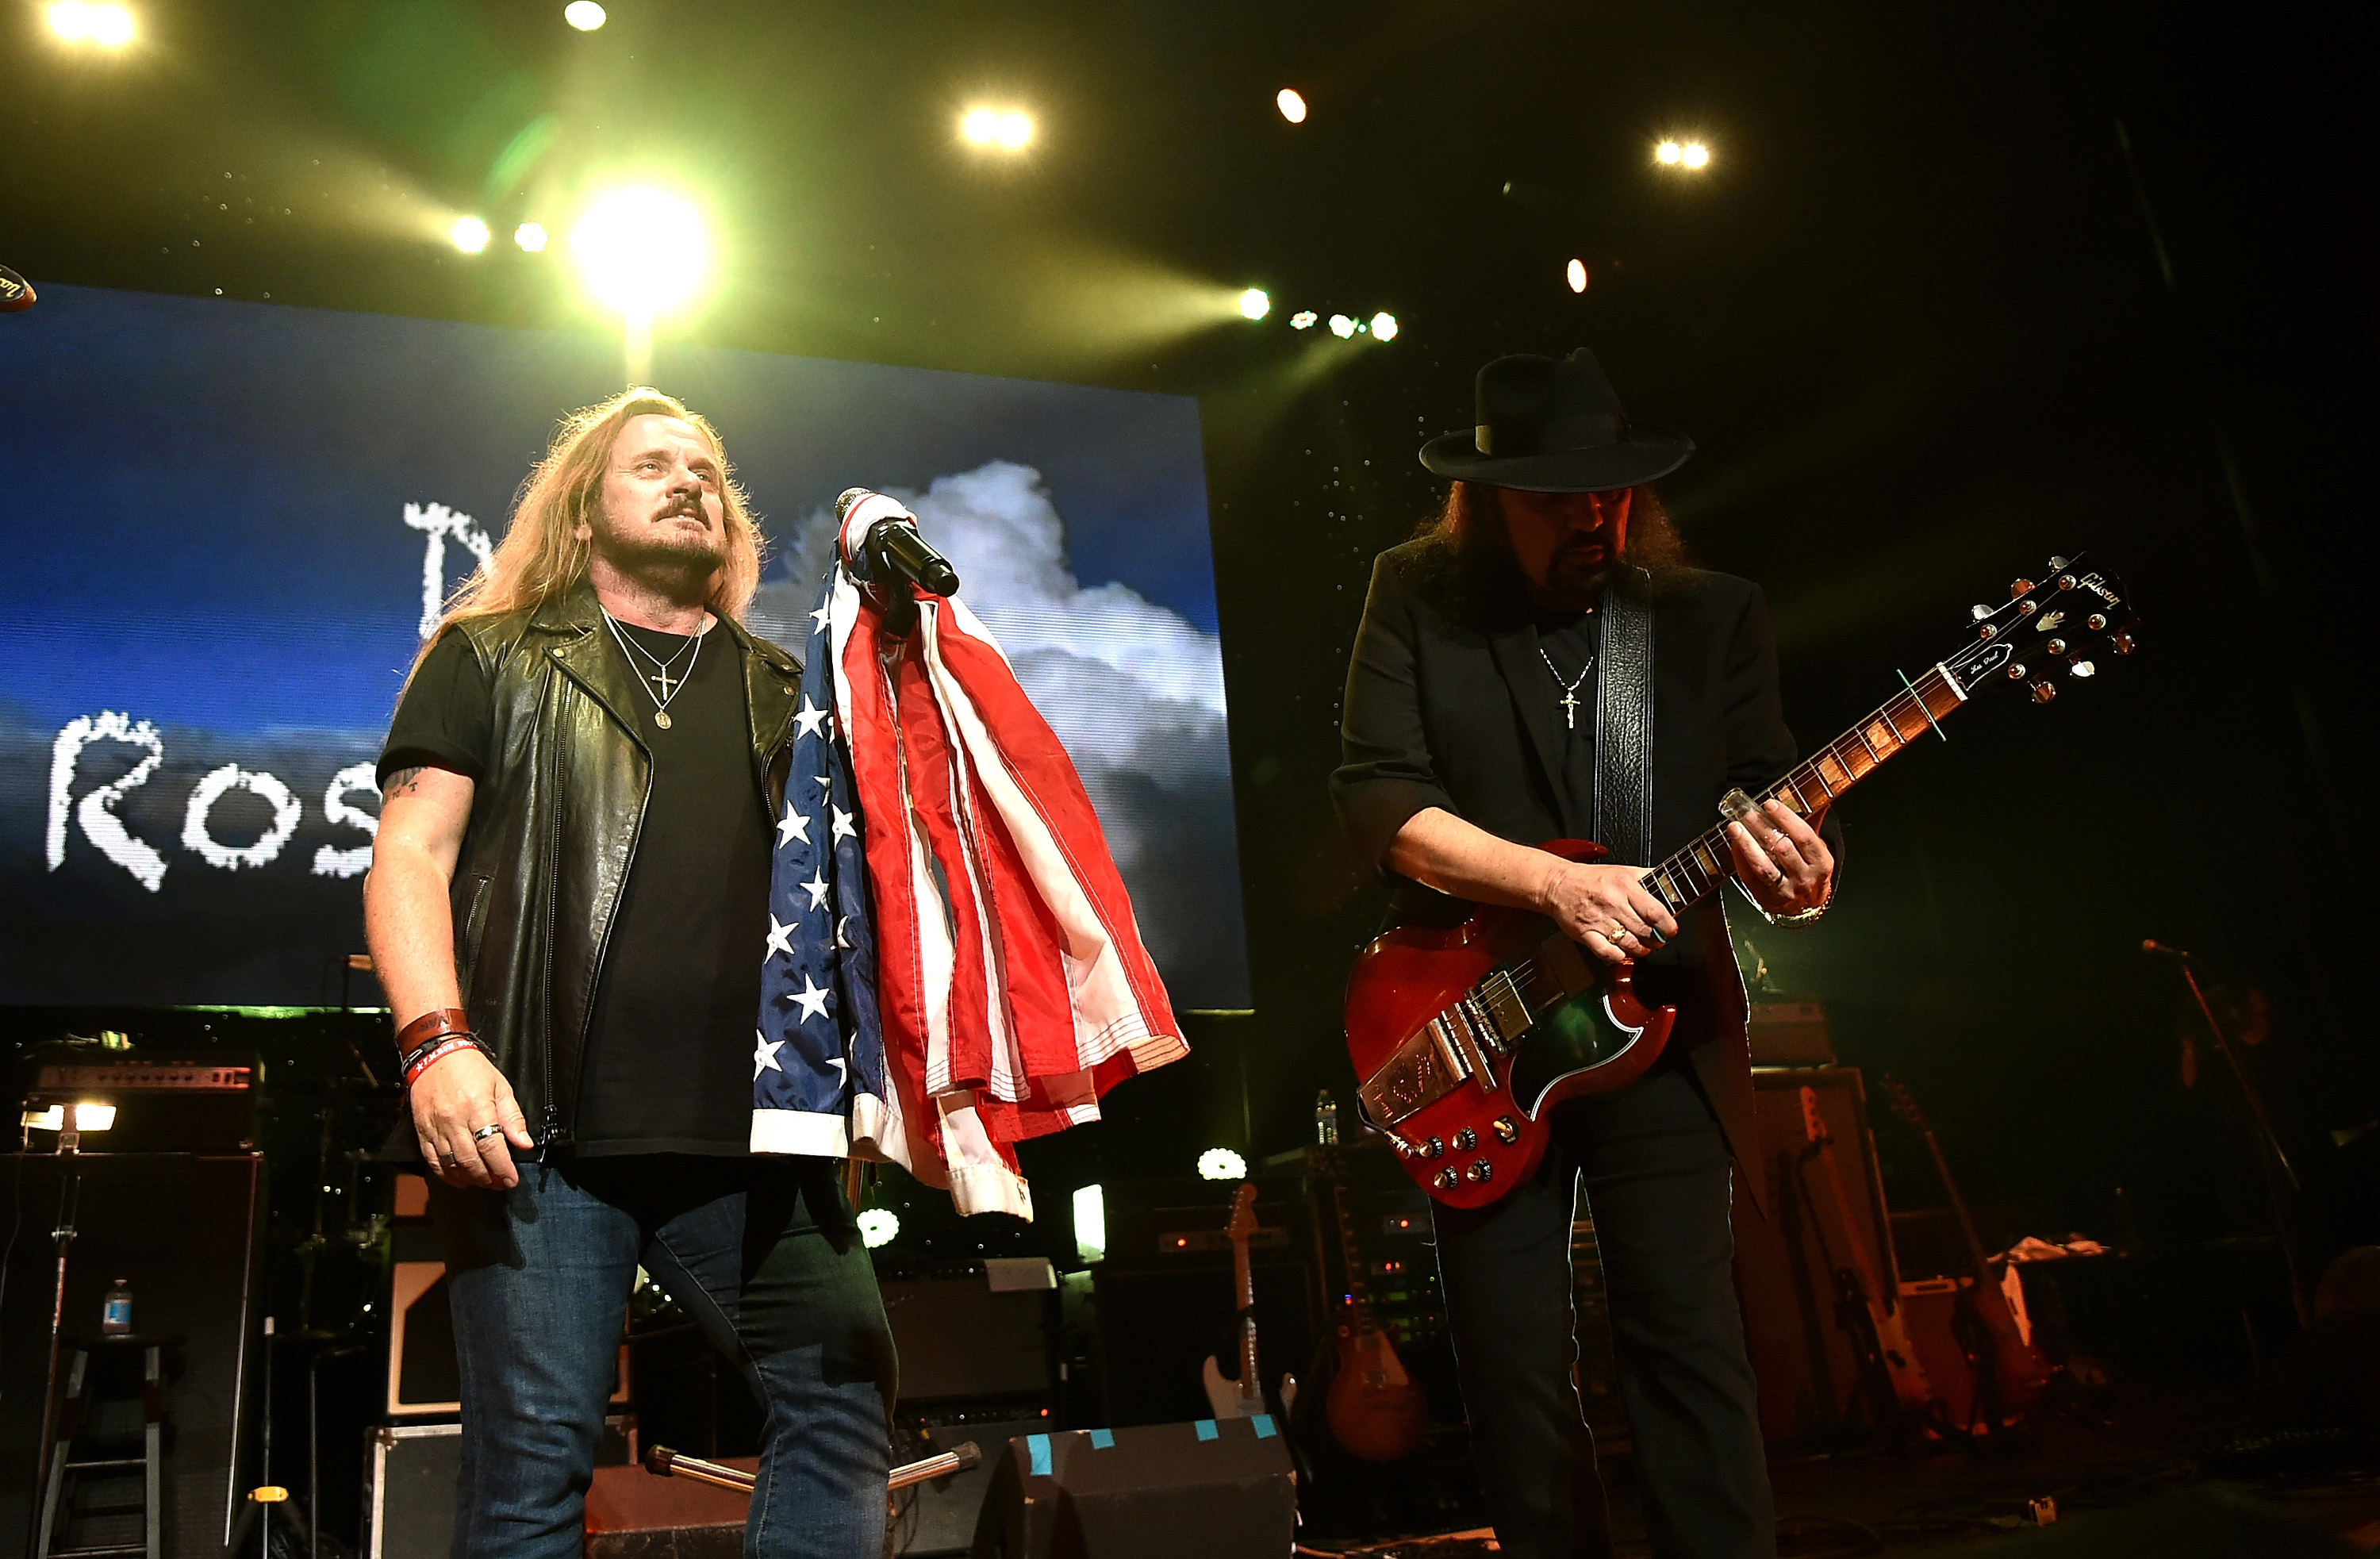 Johnny Van Zant of Lynyrd Skynyrd and Gary Rossington perform onstage at One More For The Fans! - Celebrating the Songs & Music of Lynyrd Skynyrd at The Fox Theatre on November 12, 2014 in Atlanta, Georgia.  (Getty)